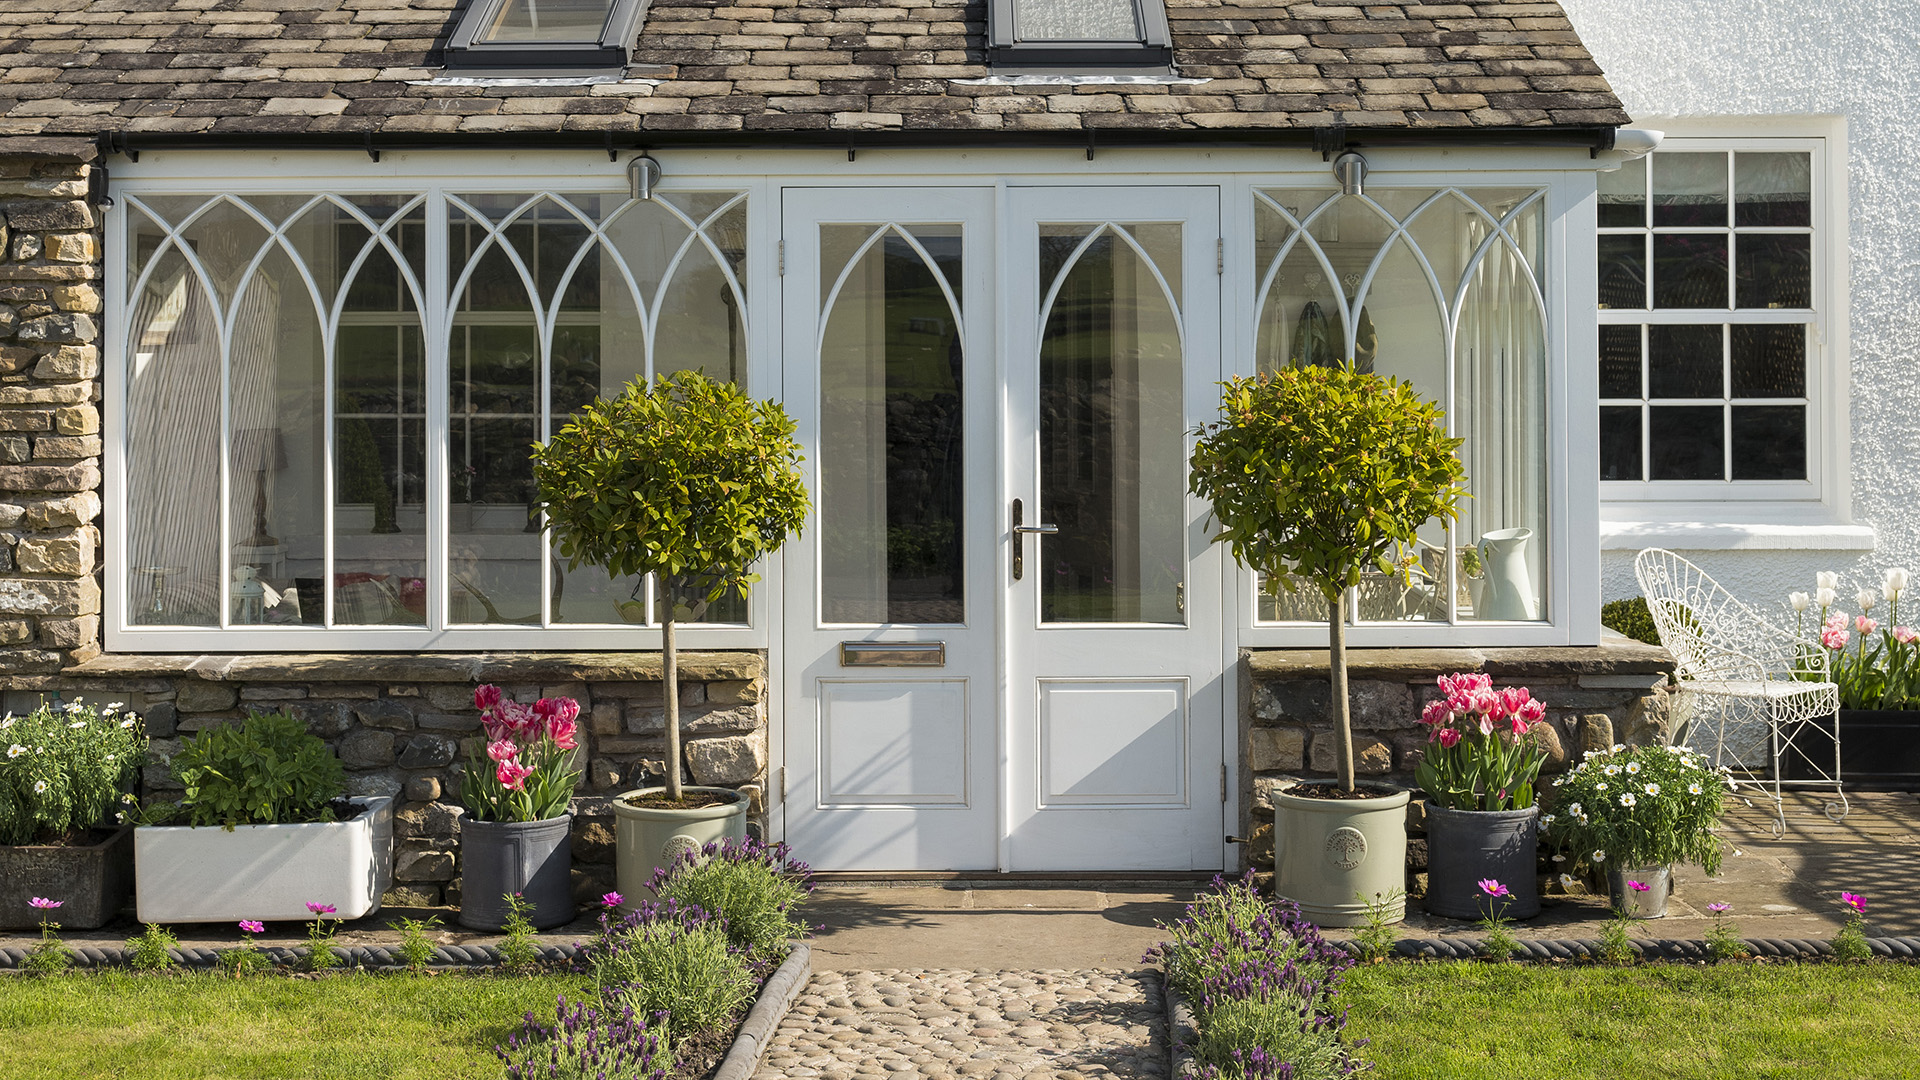 Cottage Porch Ideas: 12 Ways To A Cozy, Welcoming Entrance |